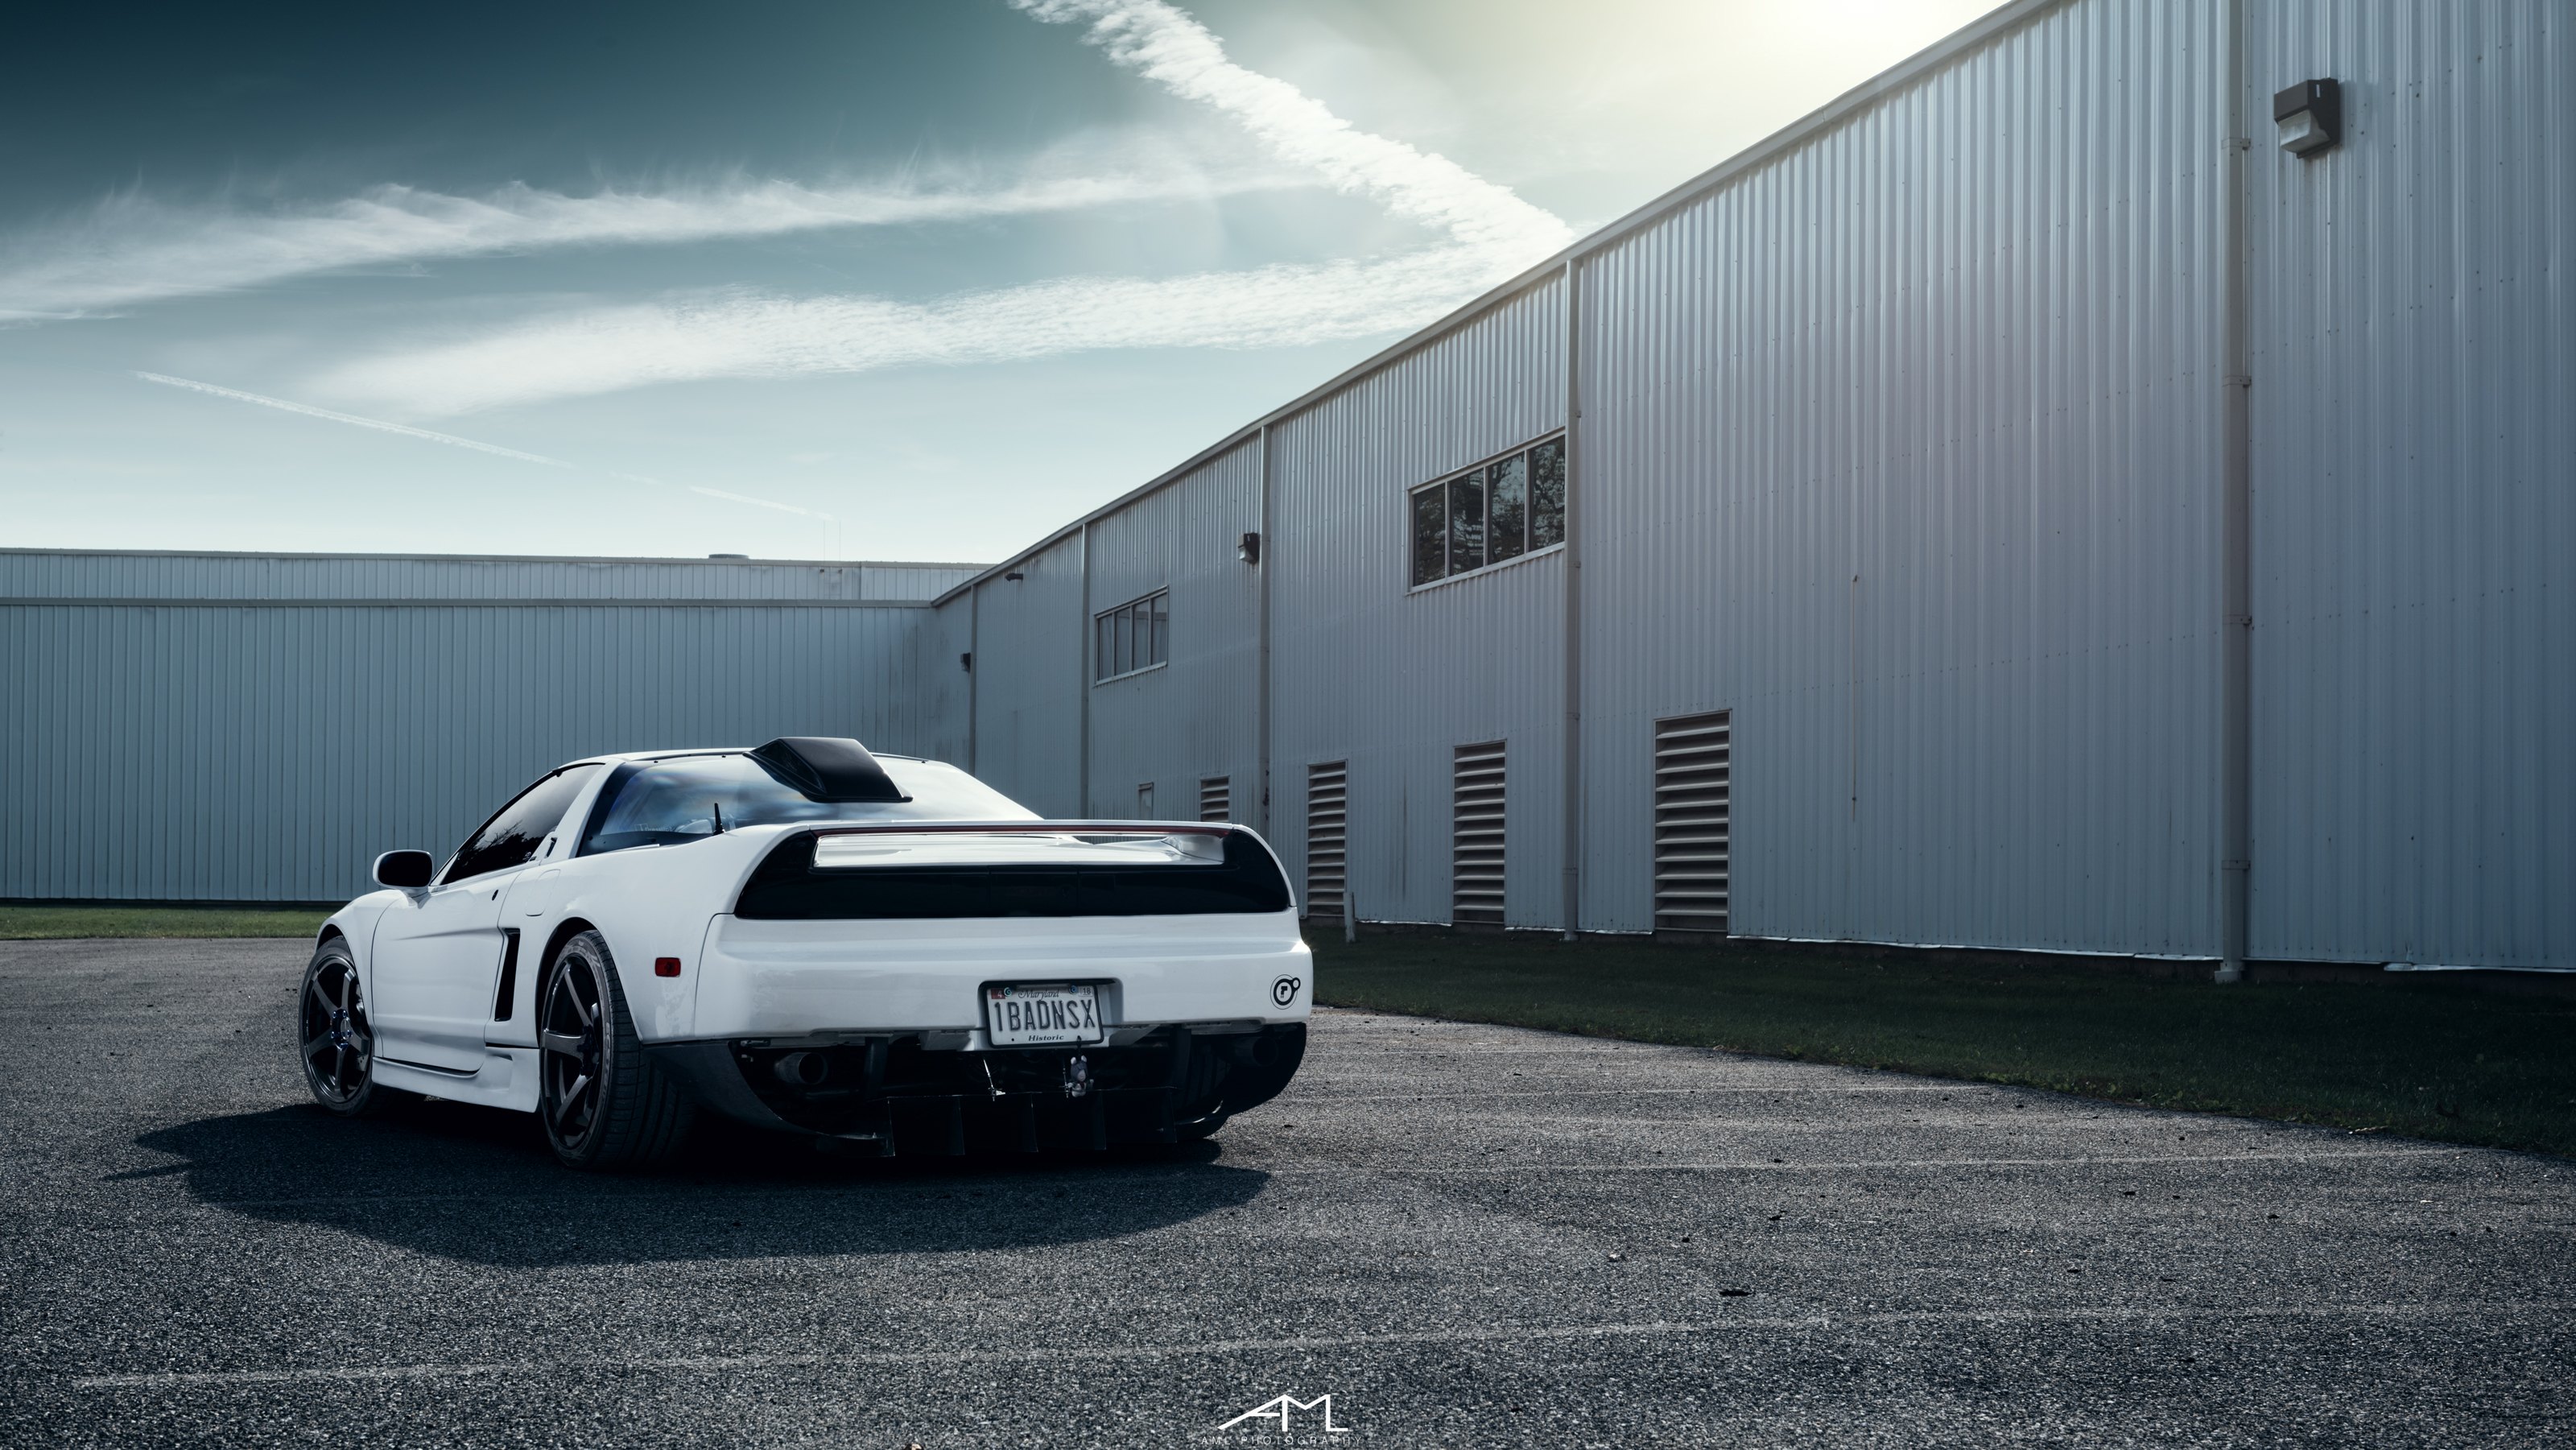 White Acura NSX with Aftermarket Rear Diffuser - Photo by Arlen Liverman